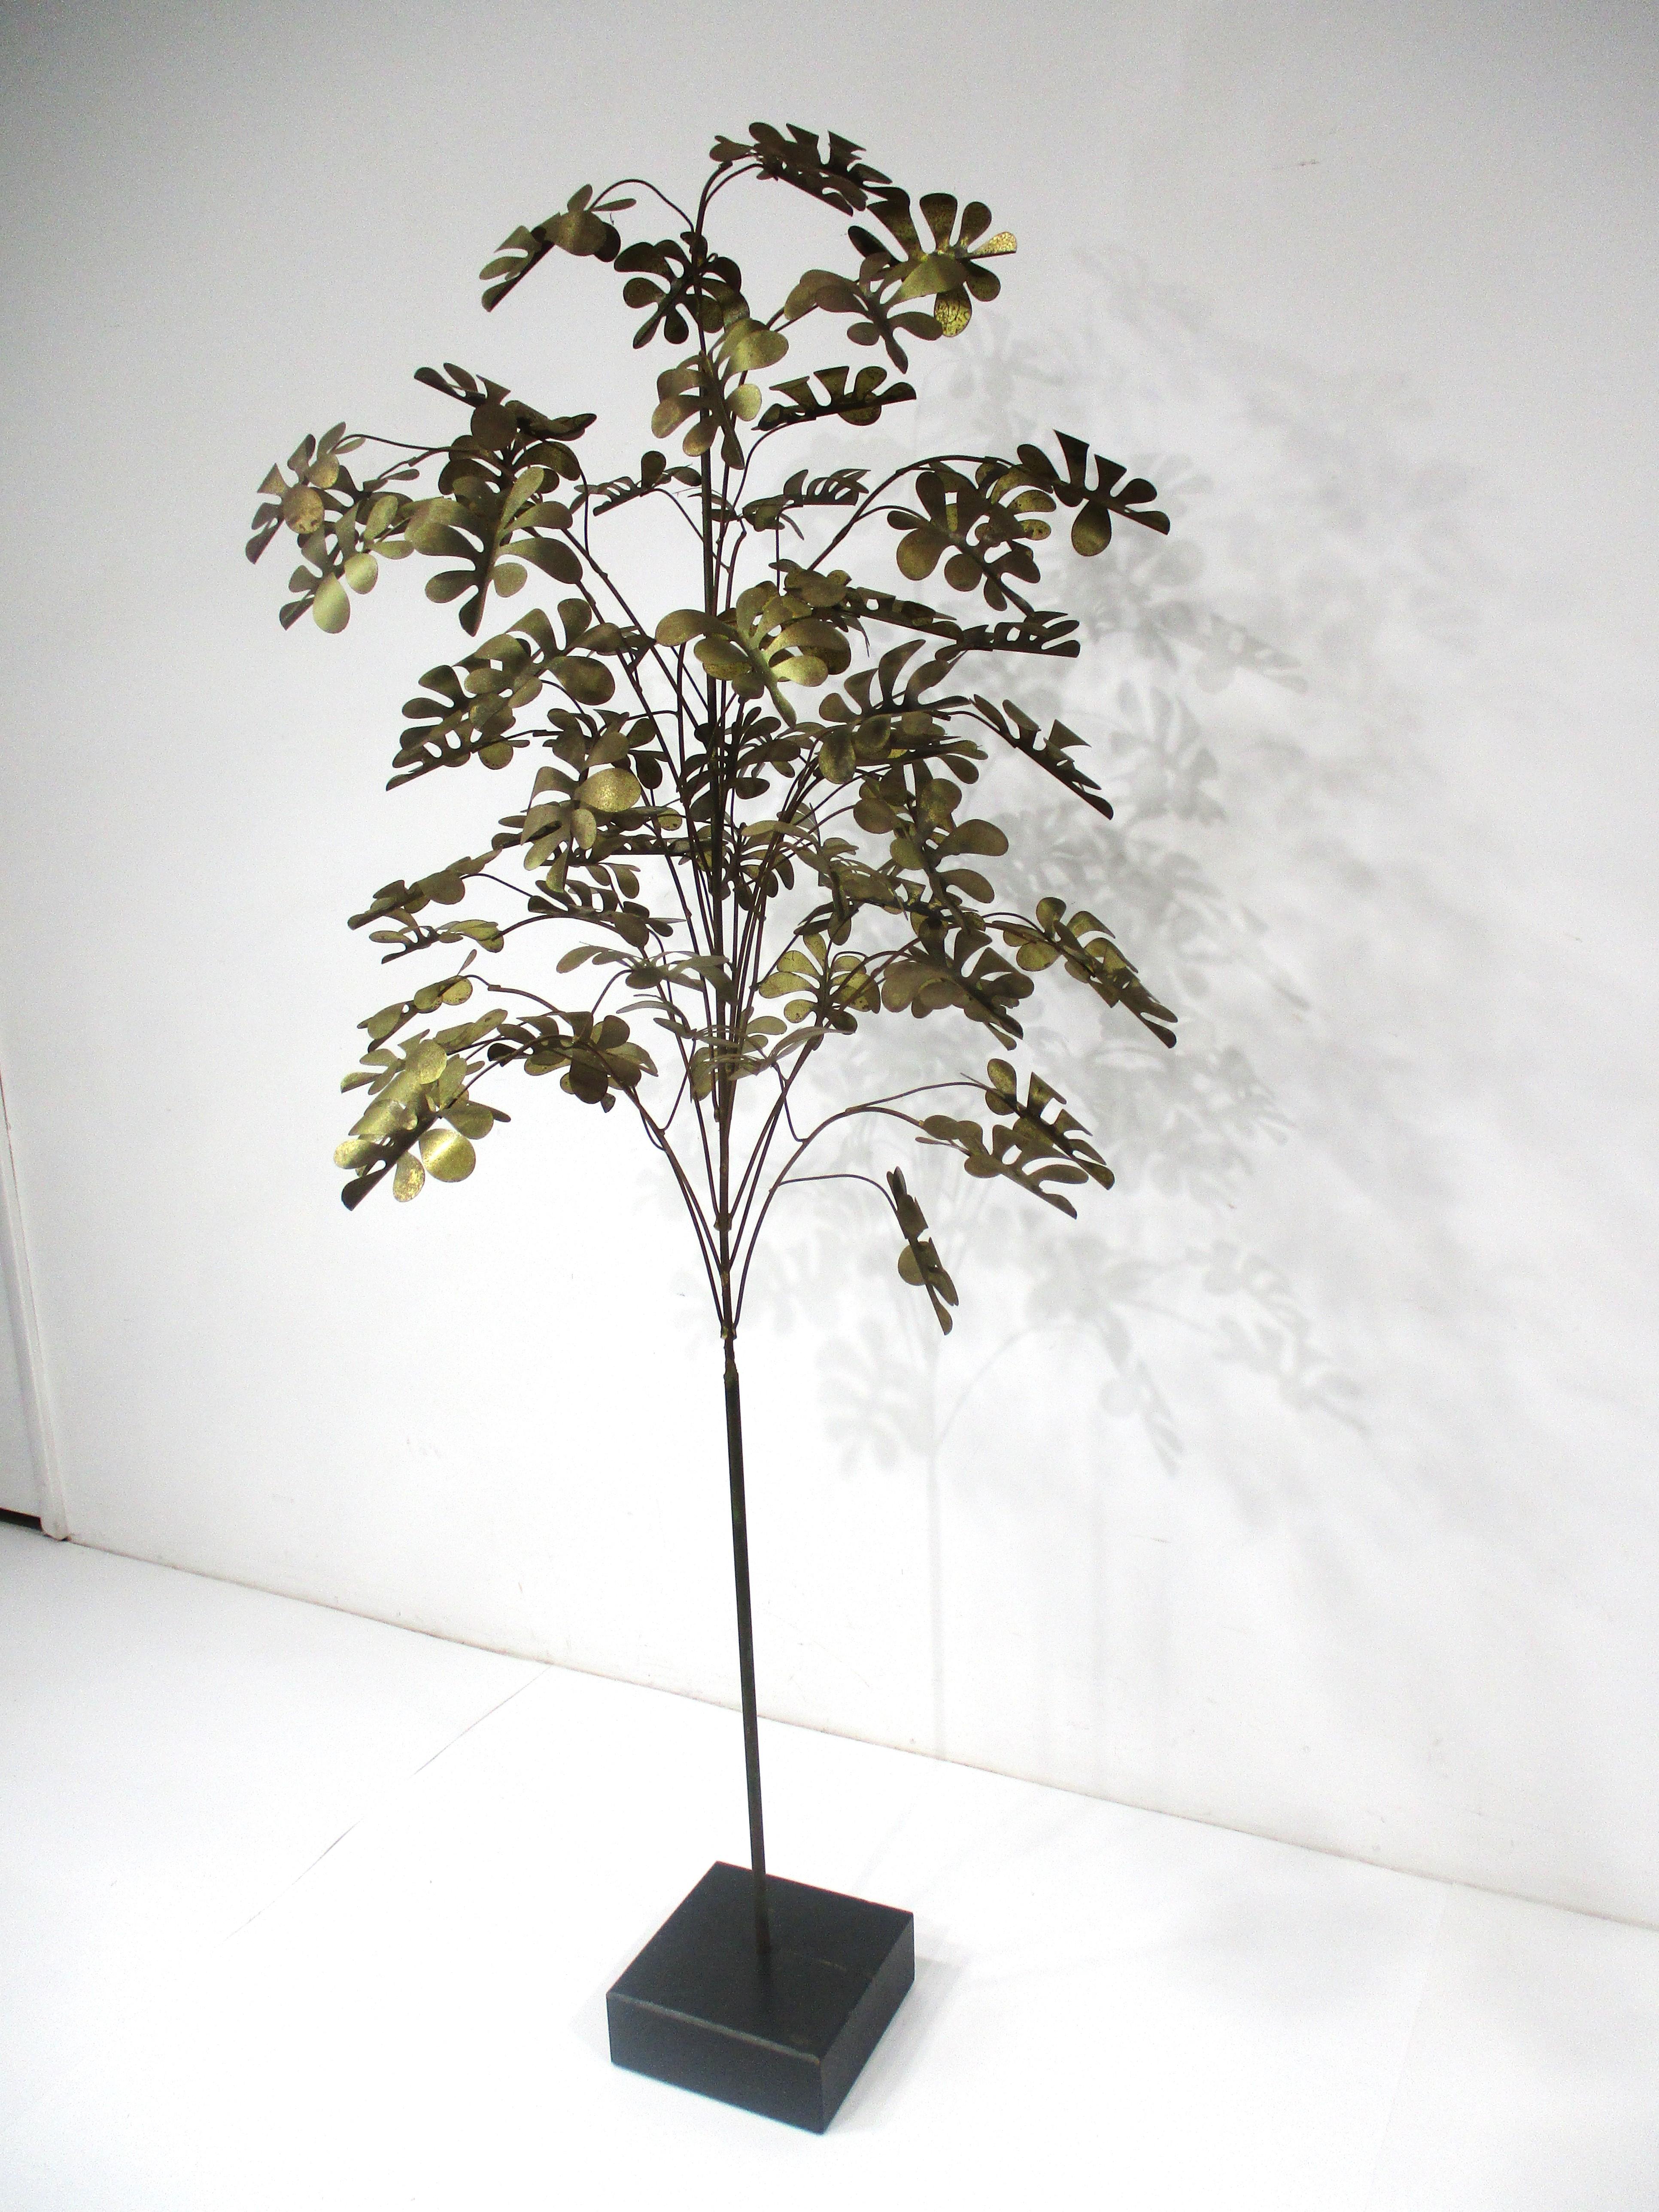 A very well crafted tree sculpture with mixed metal leaves , branches and trunk mounted on a block of ebony toned painted wood . By Curtis Jere known for their wall mounted and free standing metal creations , the piece  still retains the hand signed